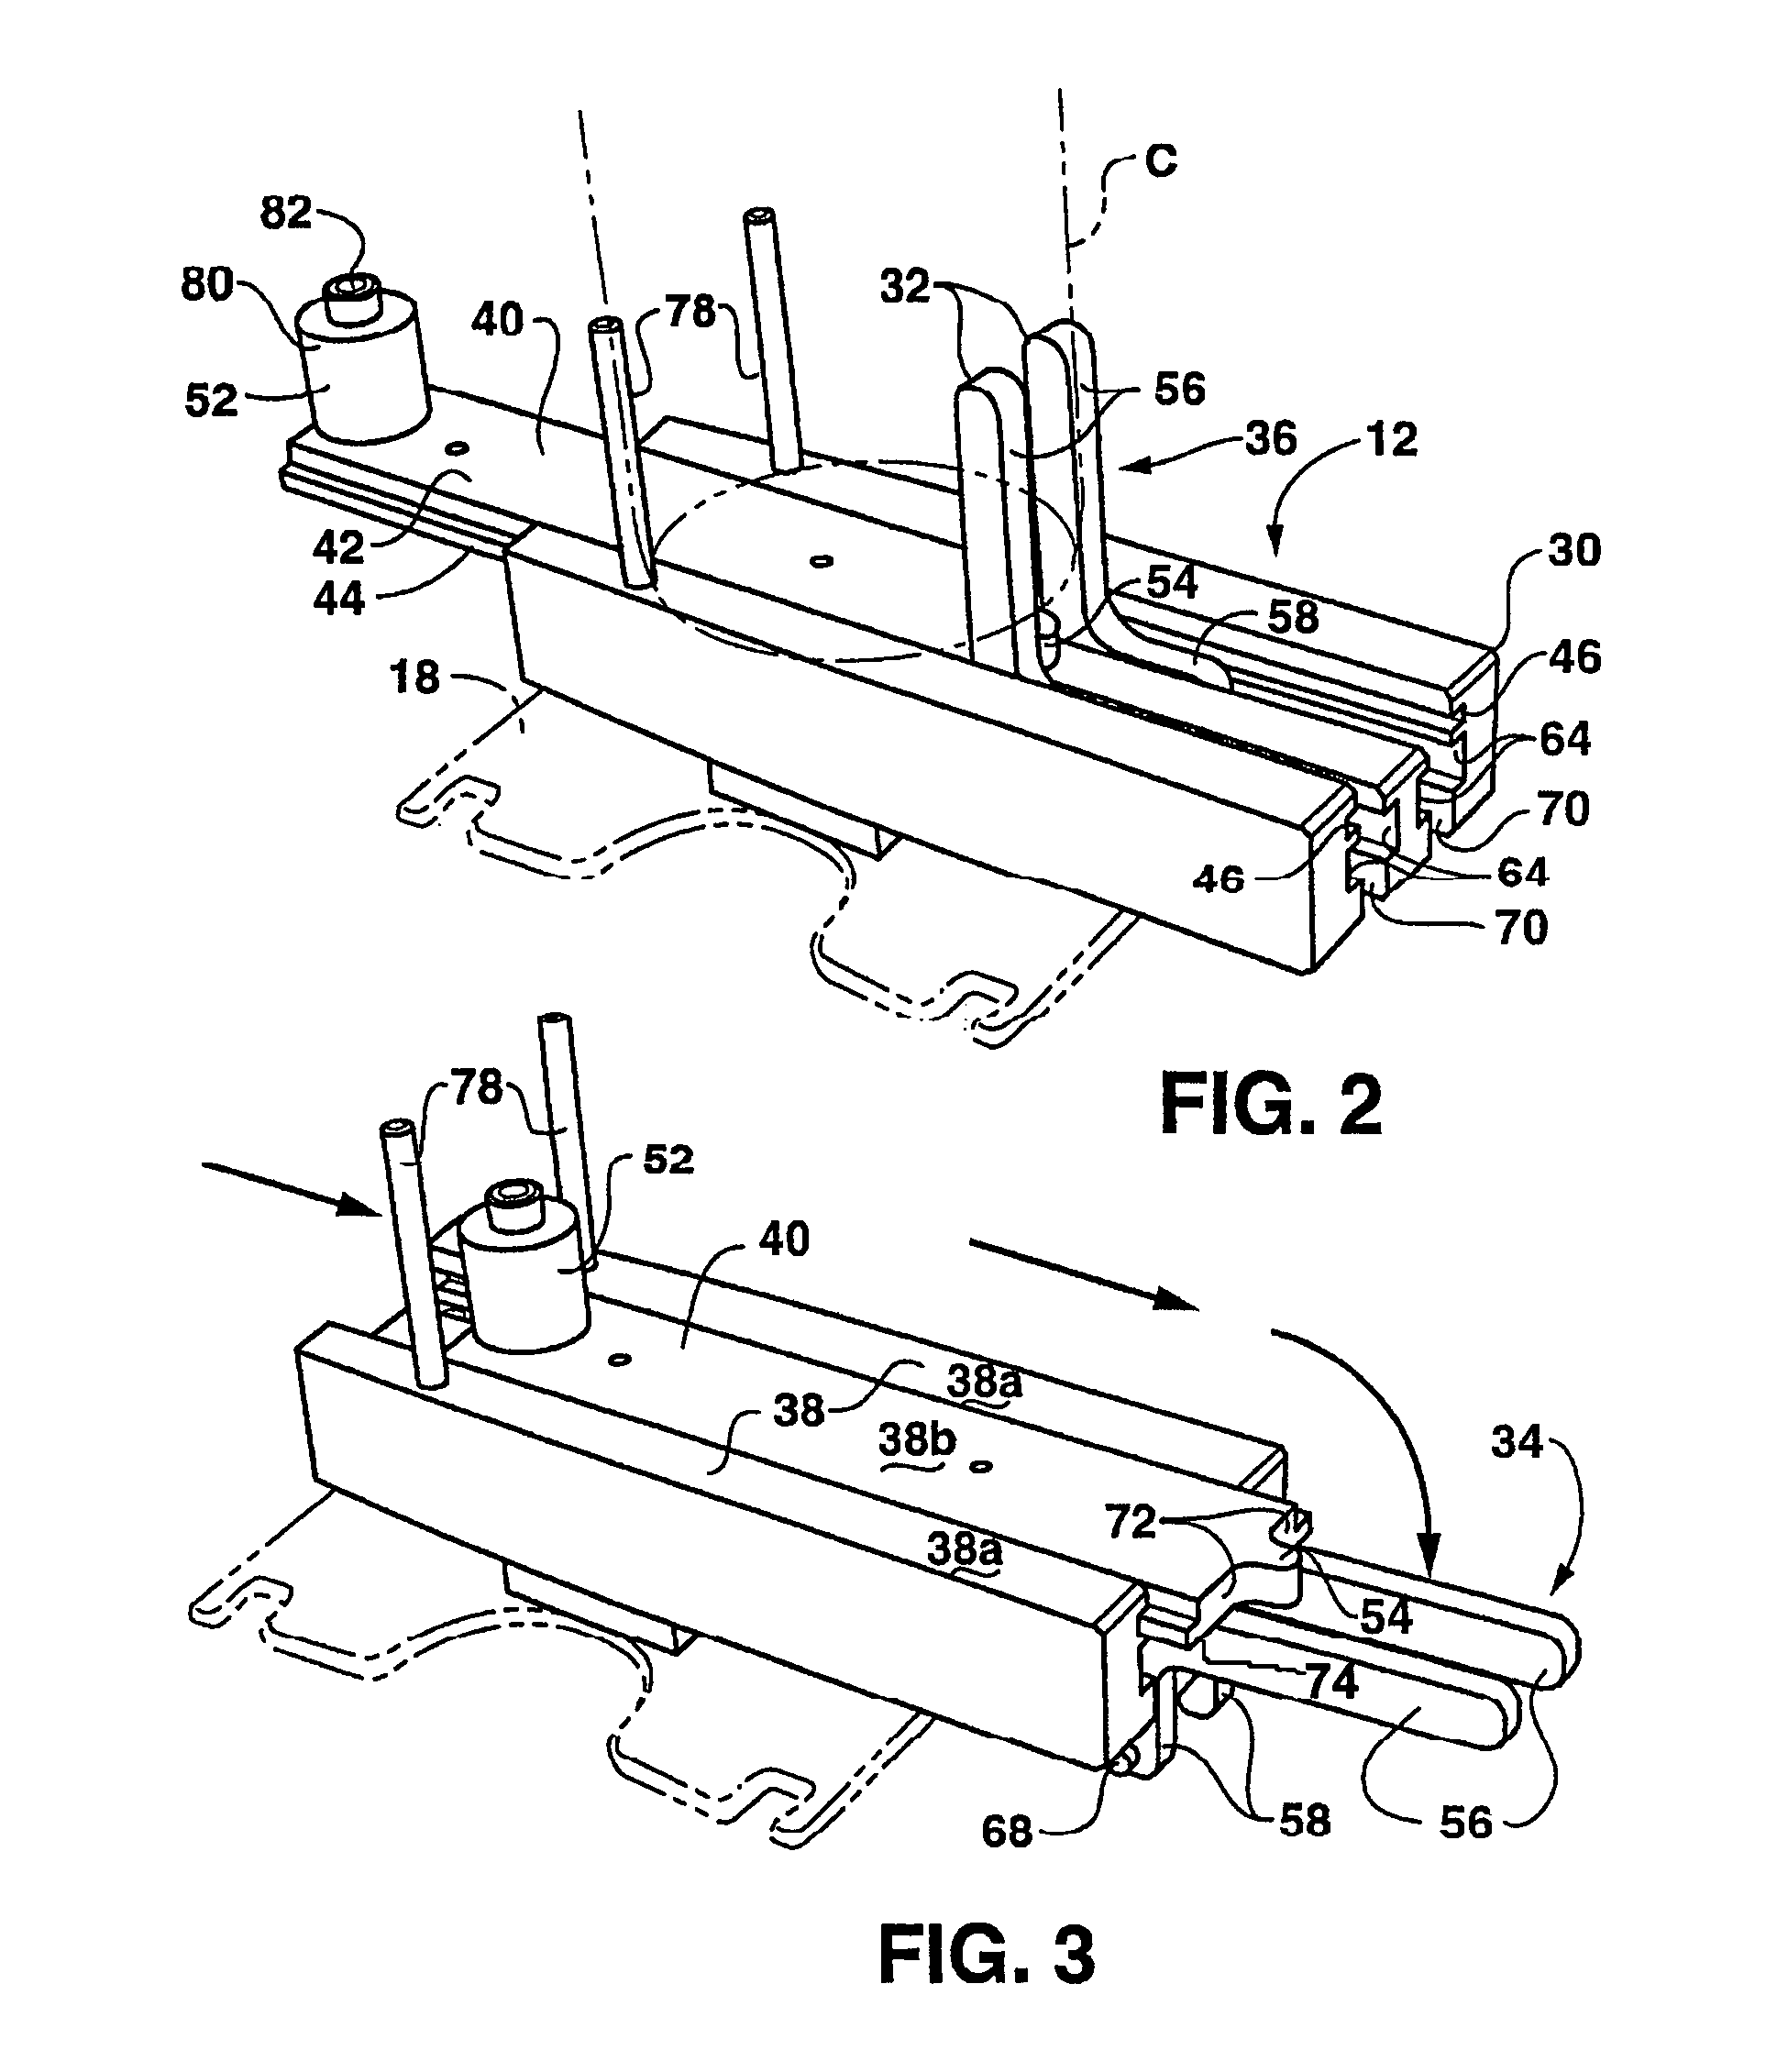 Conveyor with movable grippers, and related conveyor link